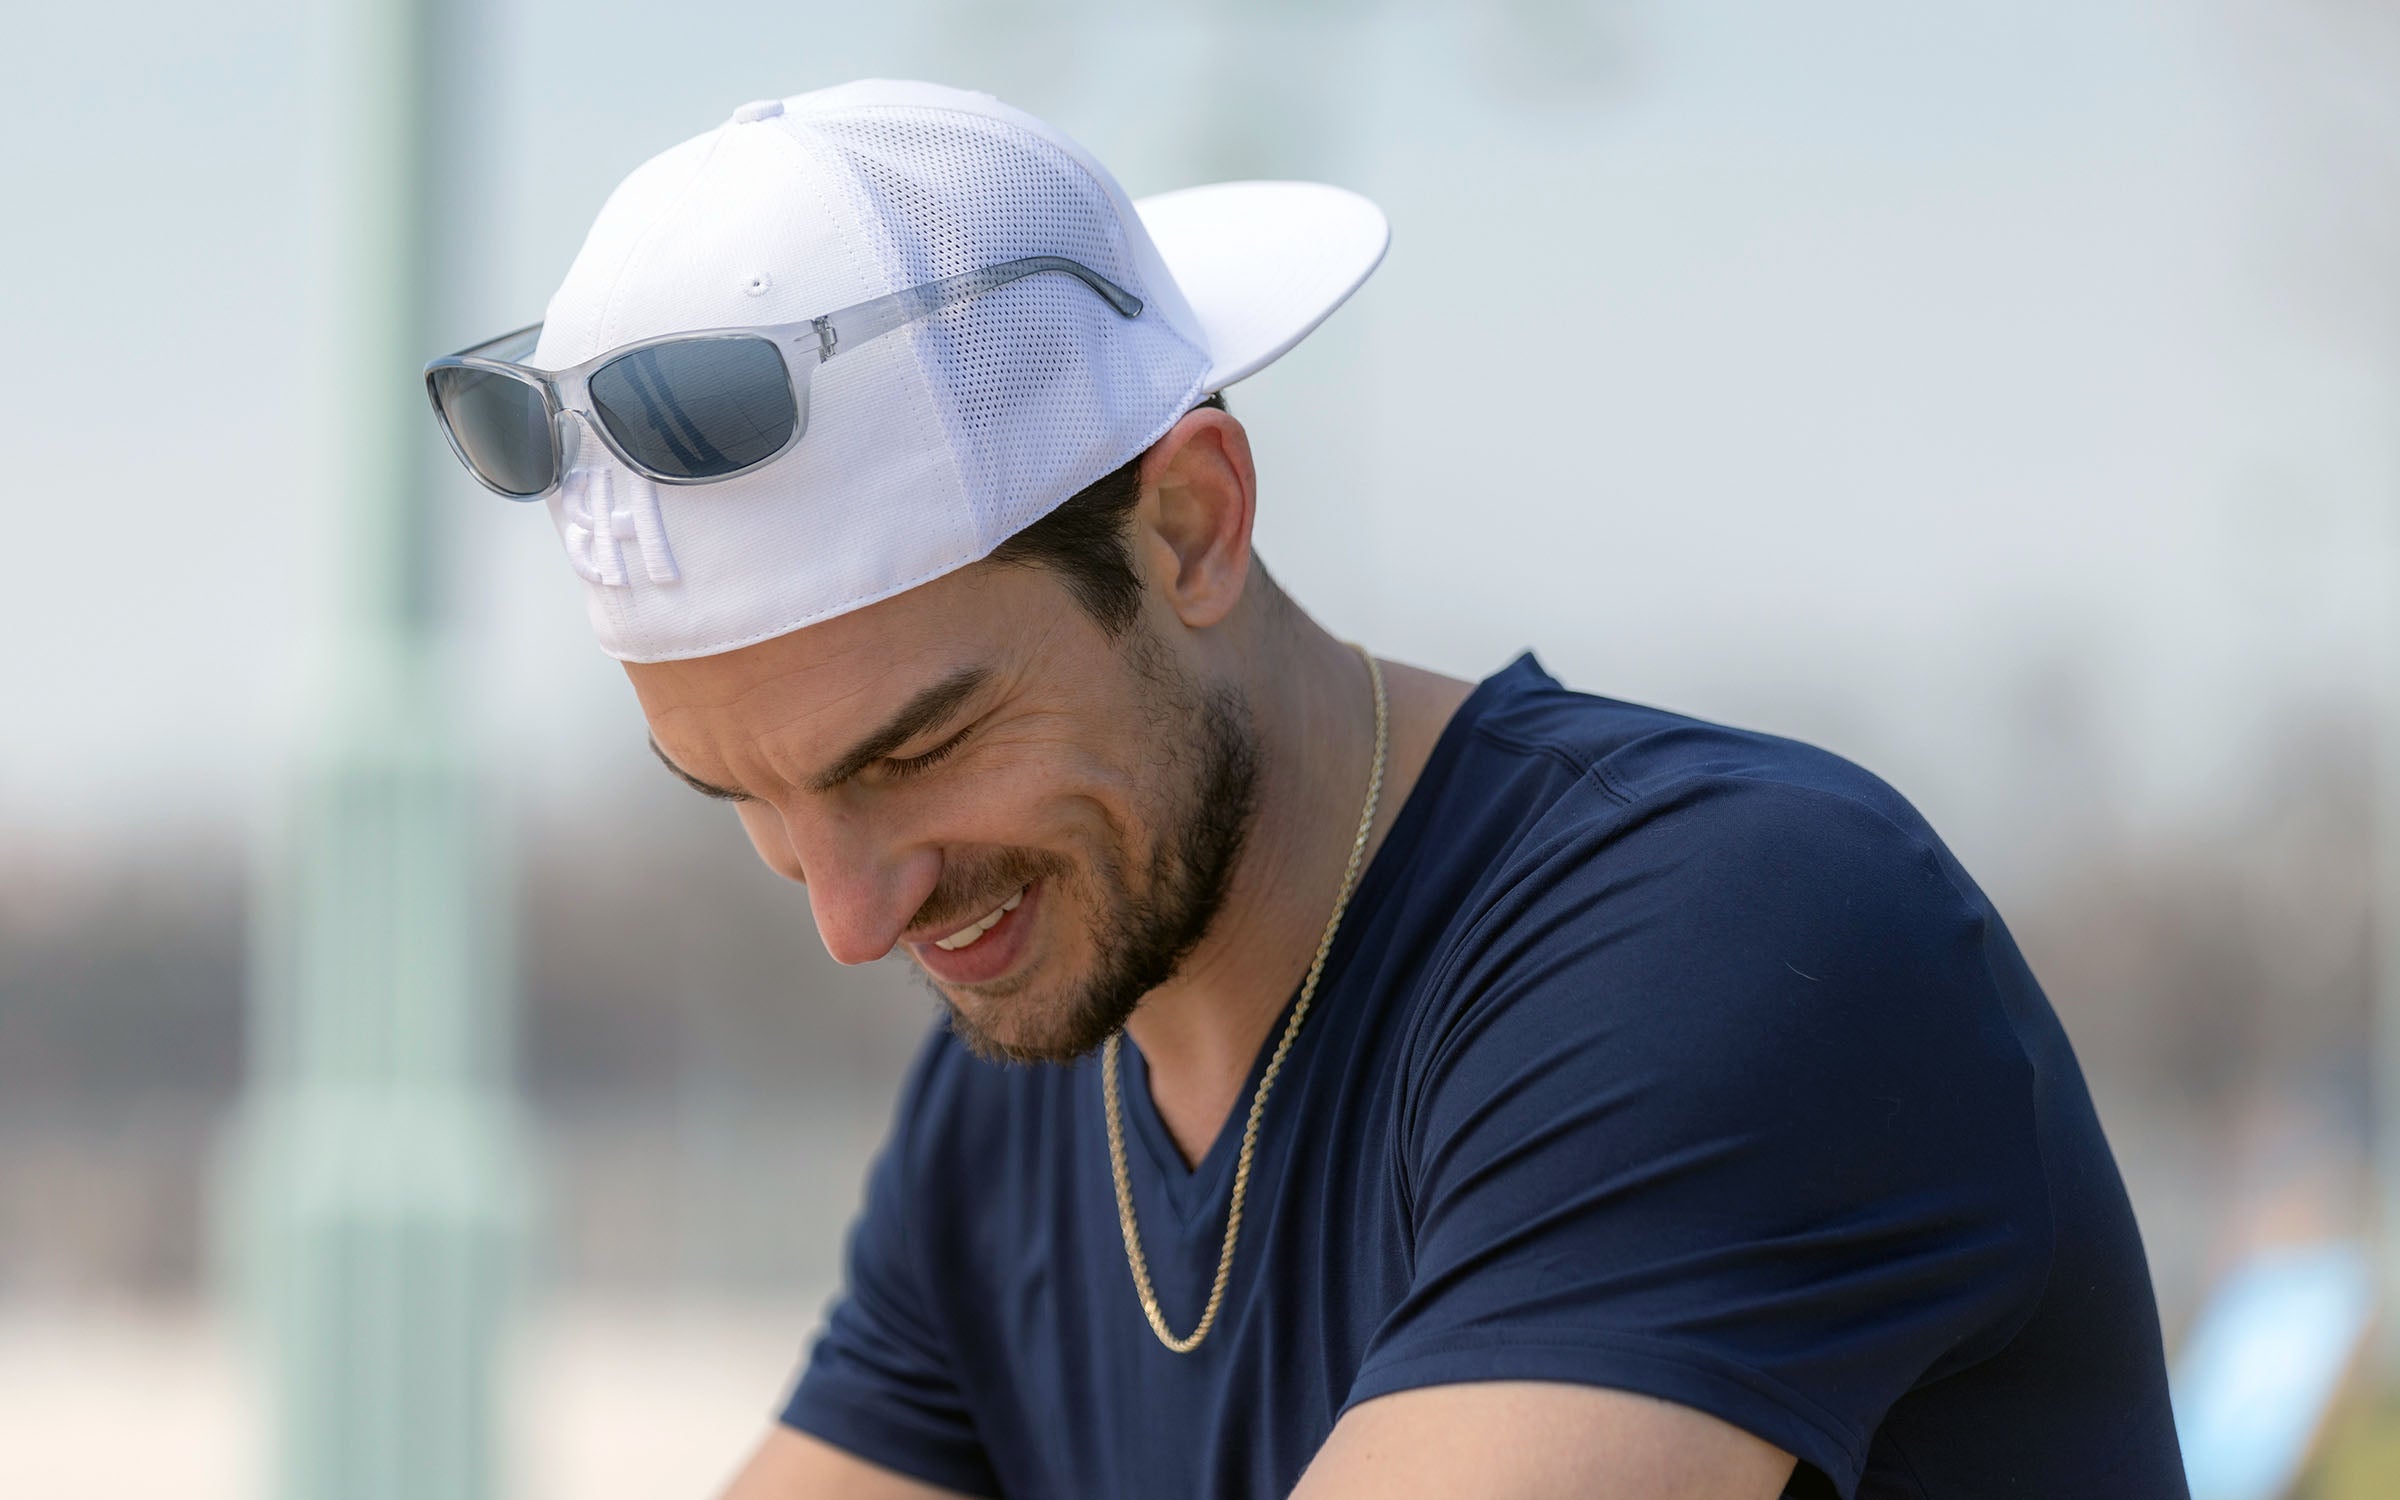 The BACK HAT(tm): Re-engineered to Be Worn Backwards… and Look GREAT.